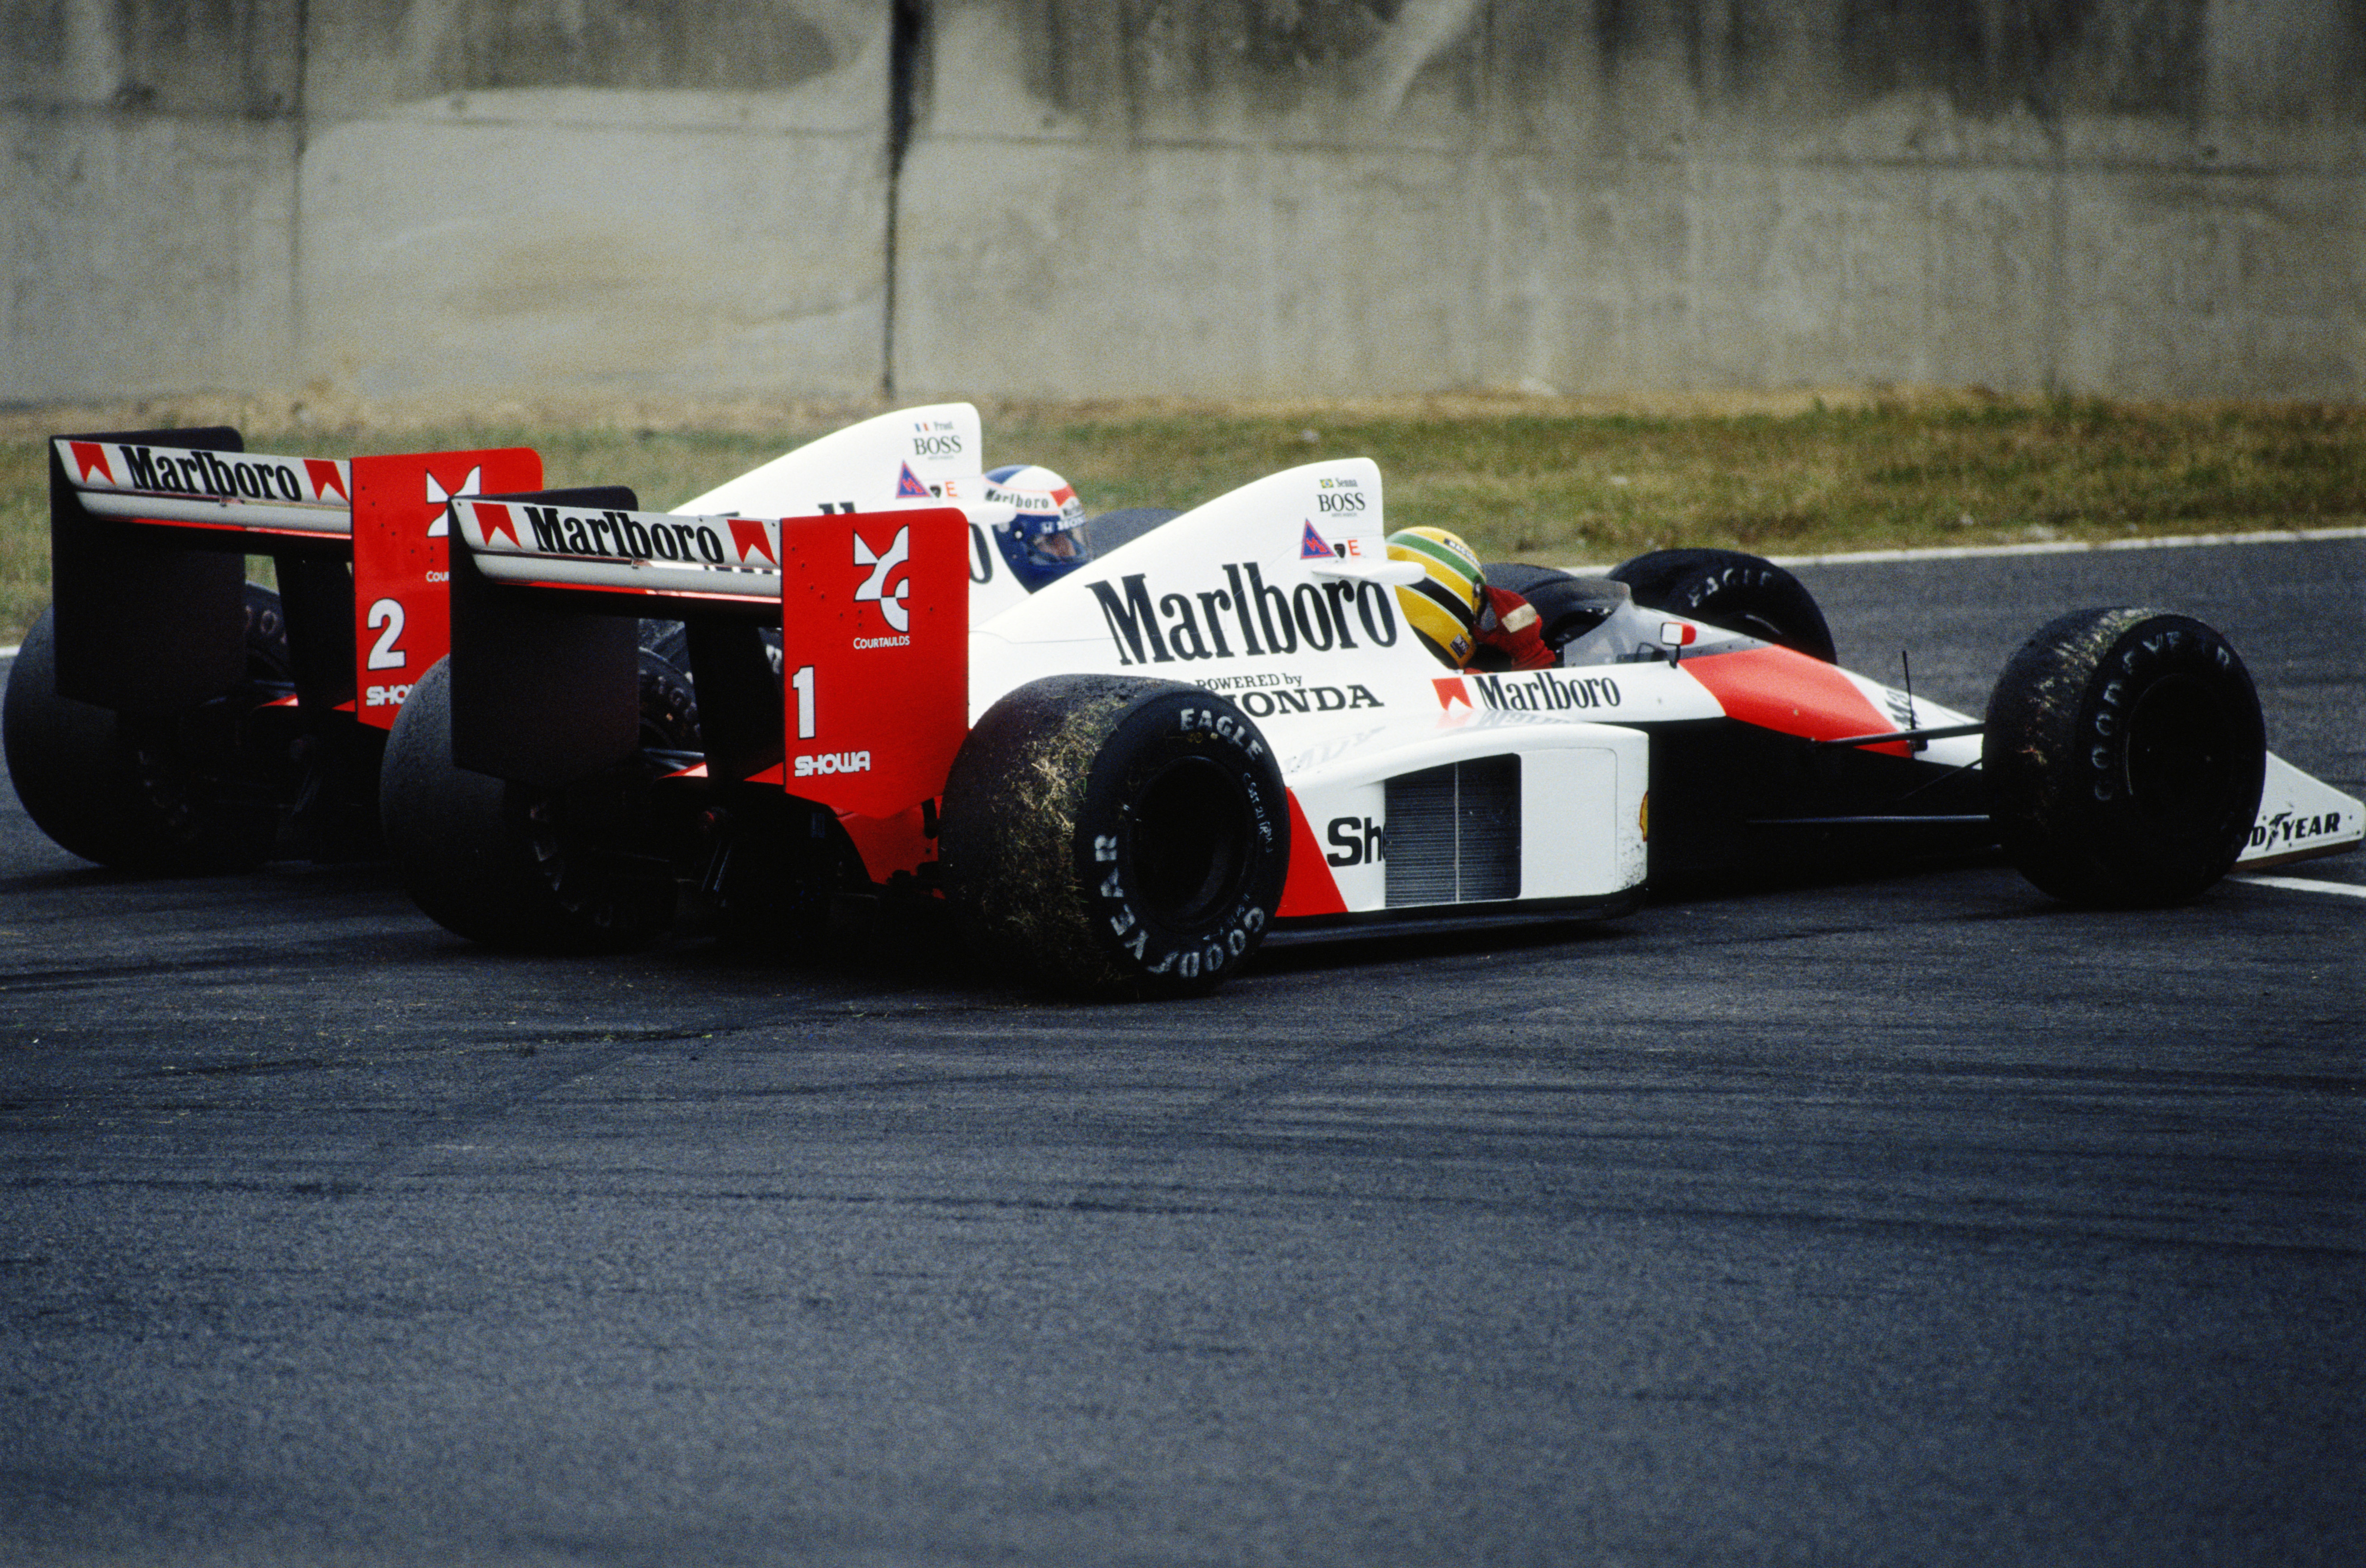 Senna and Prost get into a tangle